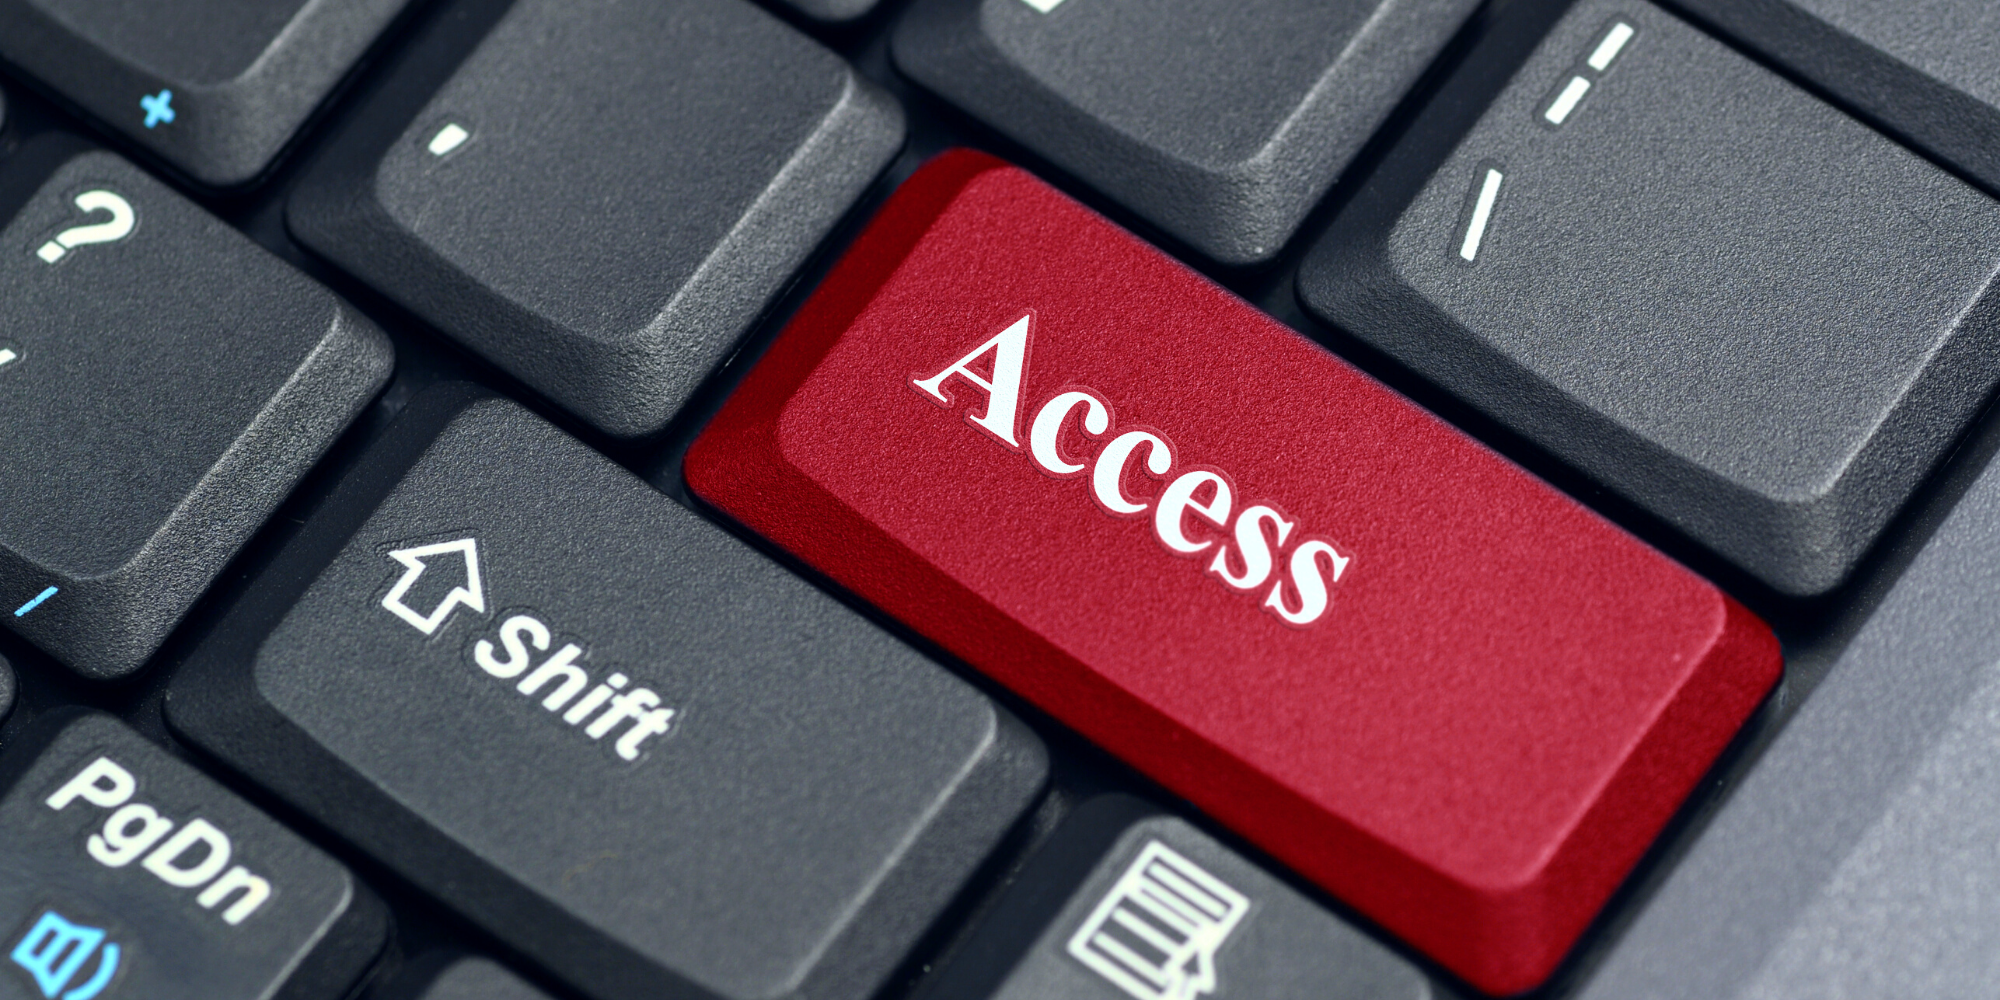 Resource Roundup: How to Make Your Content More Accessible